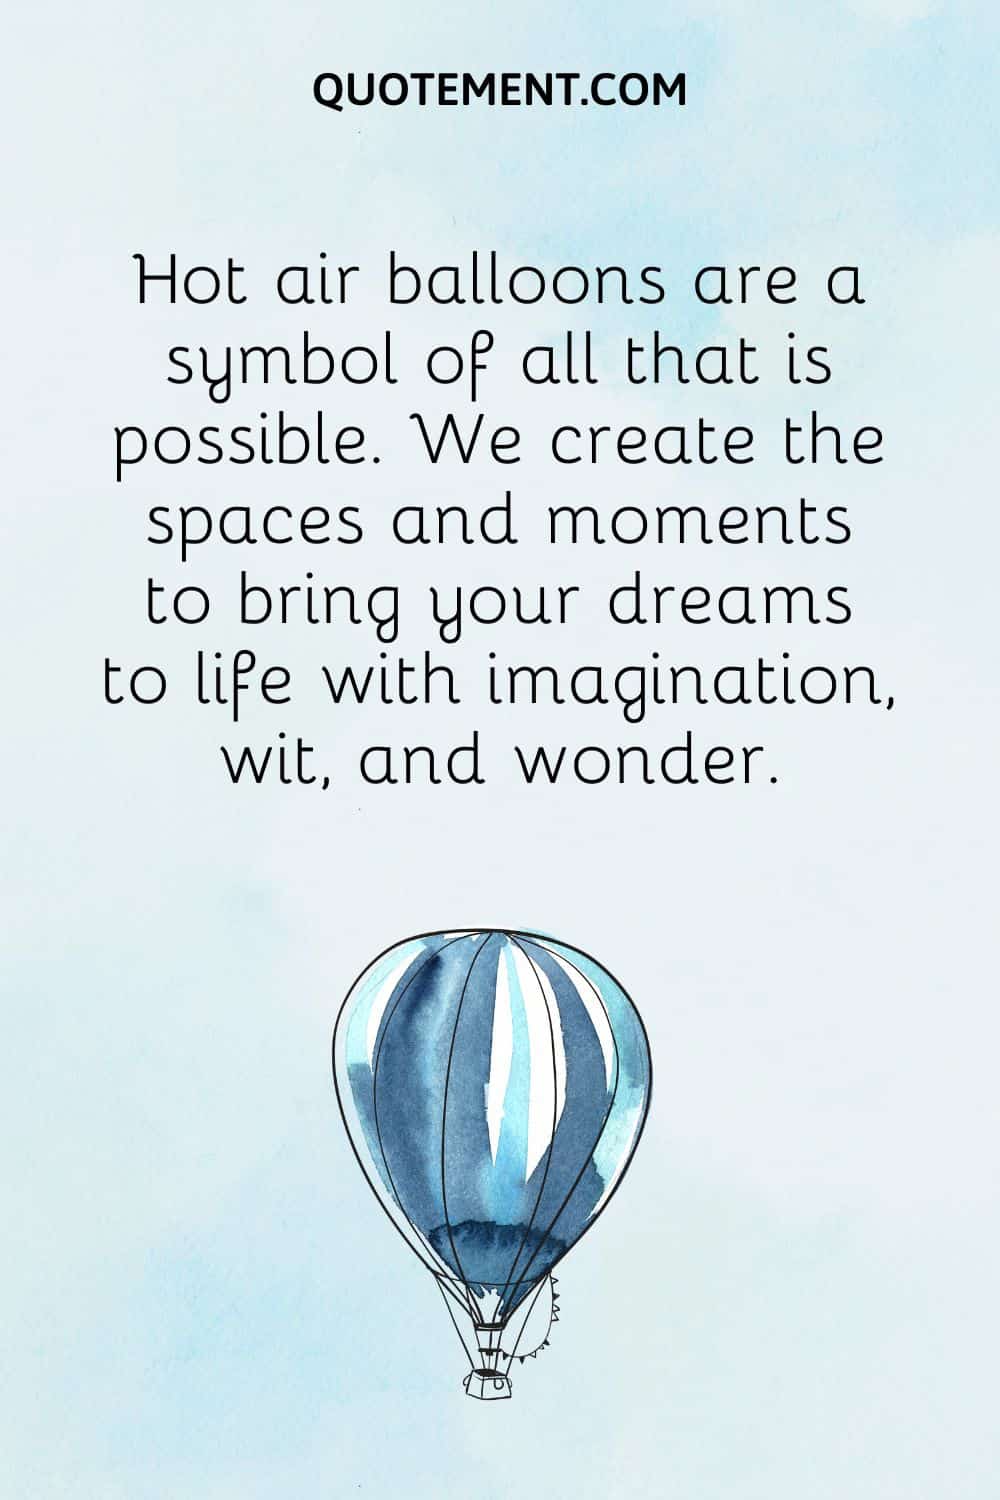  Hot air balloons are a symbol of all that is possible